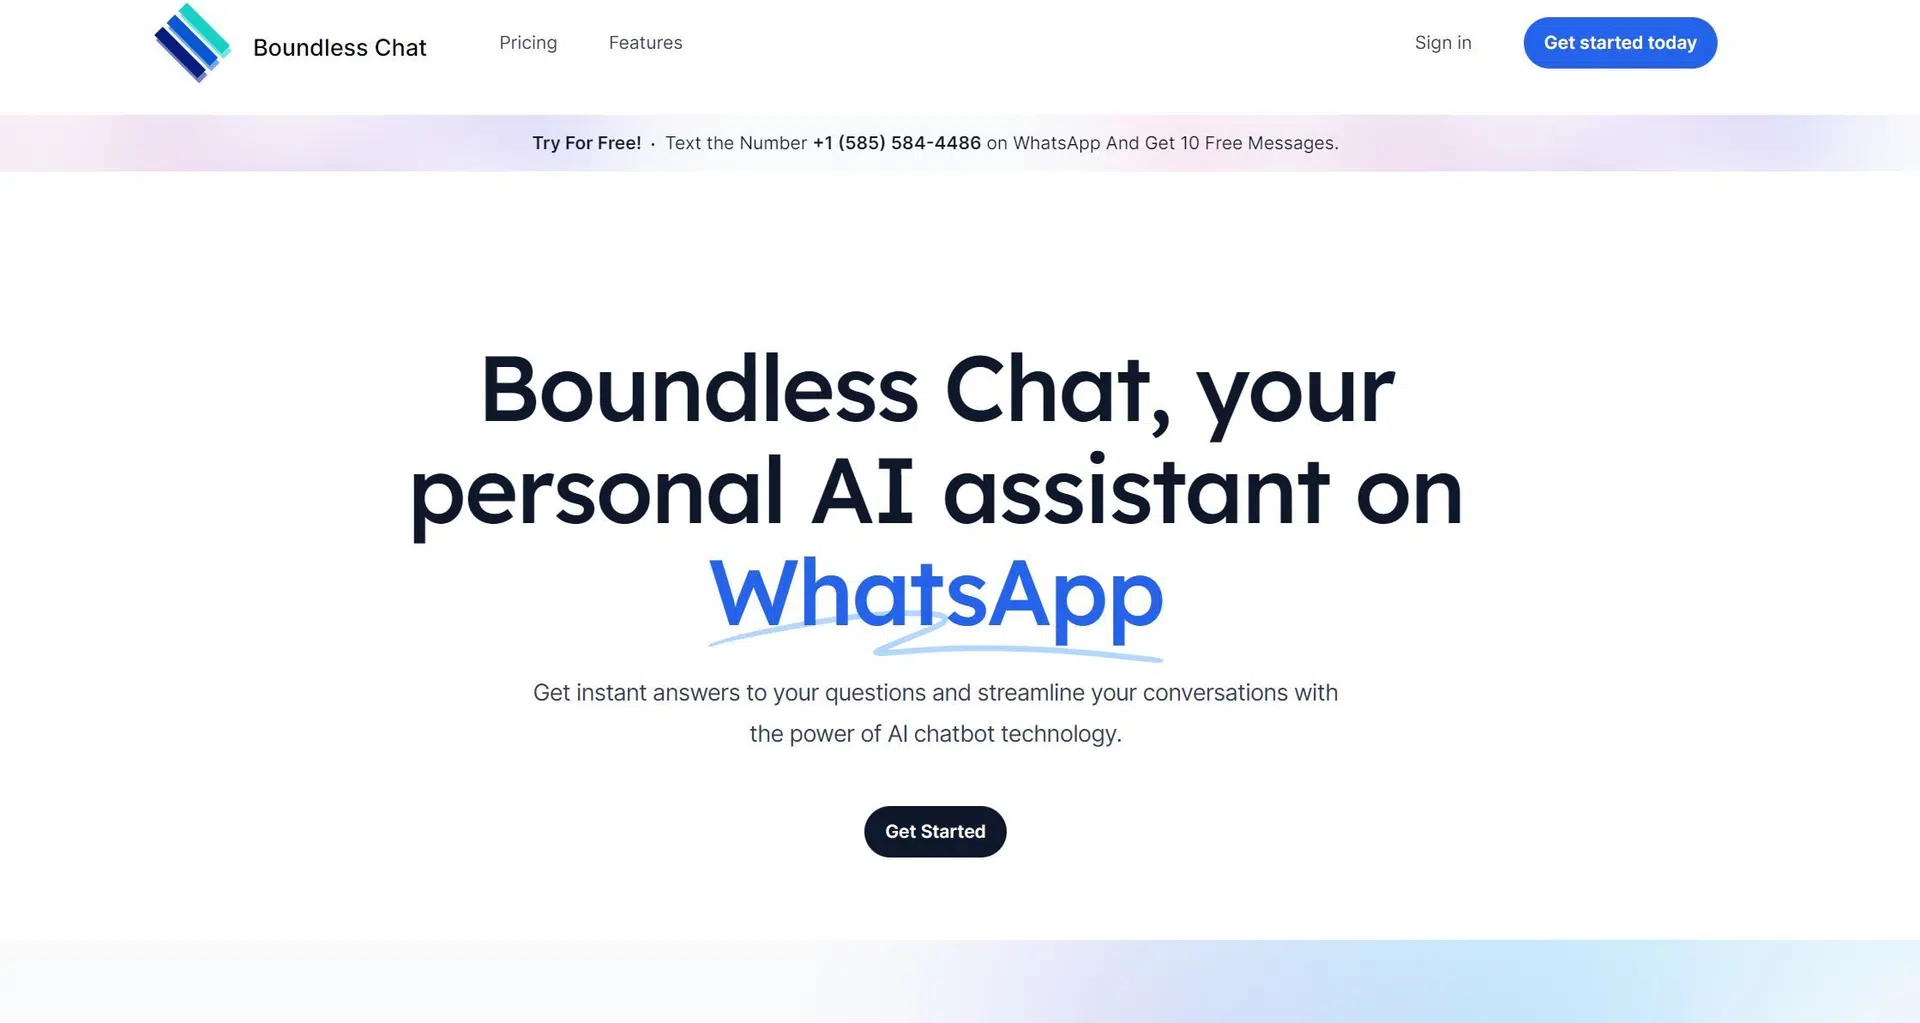 Boundless Chatwebsite picture